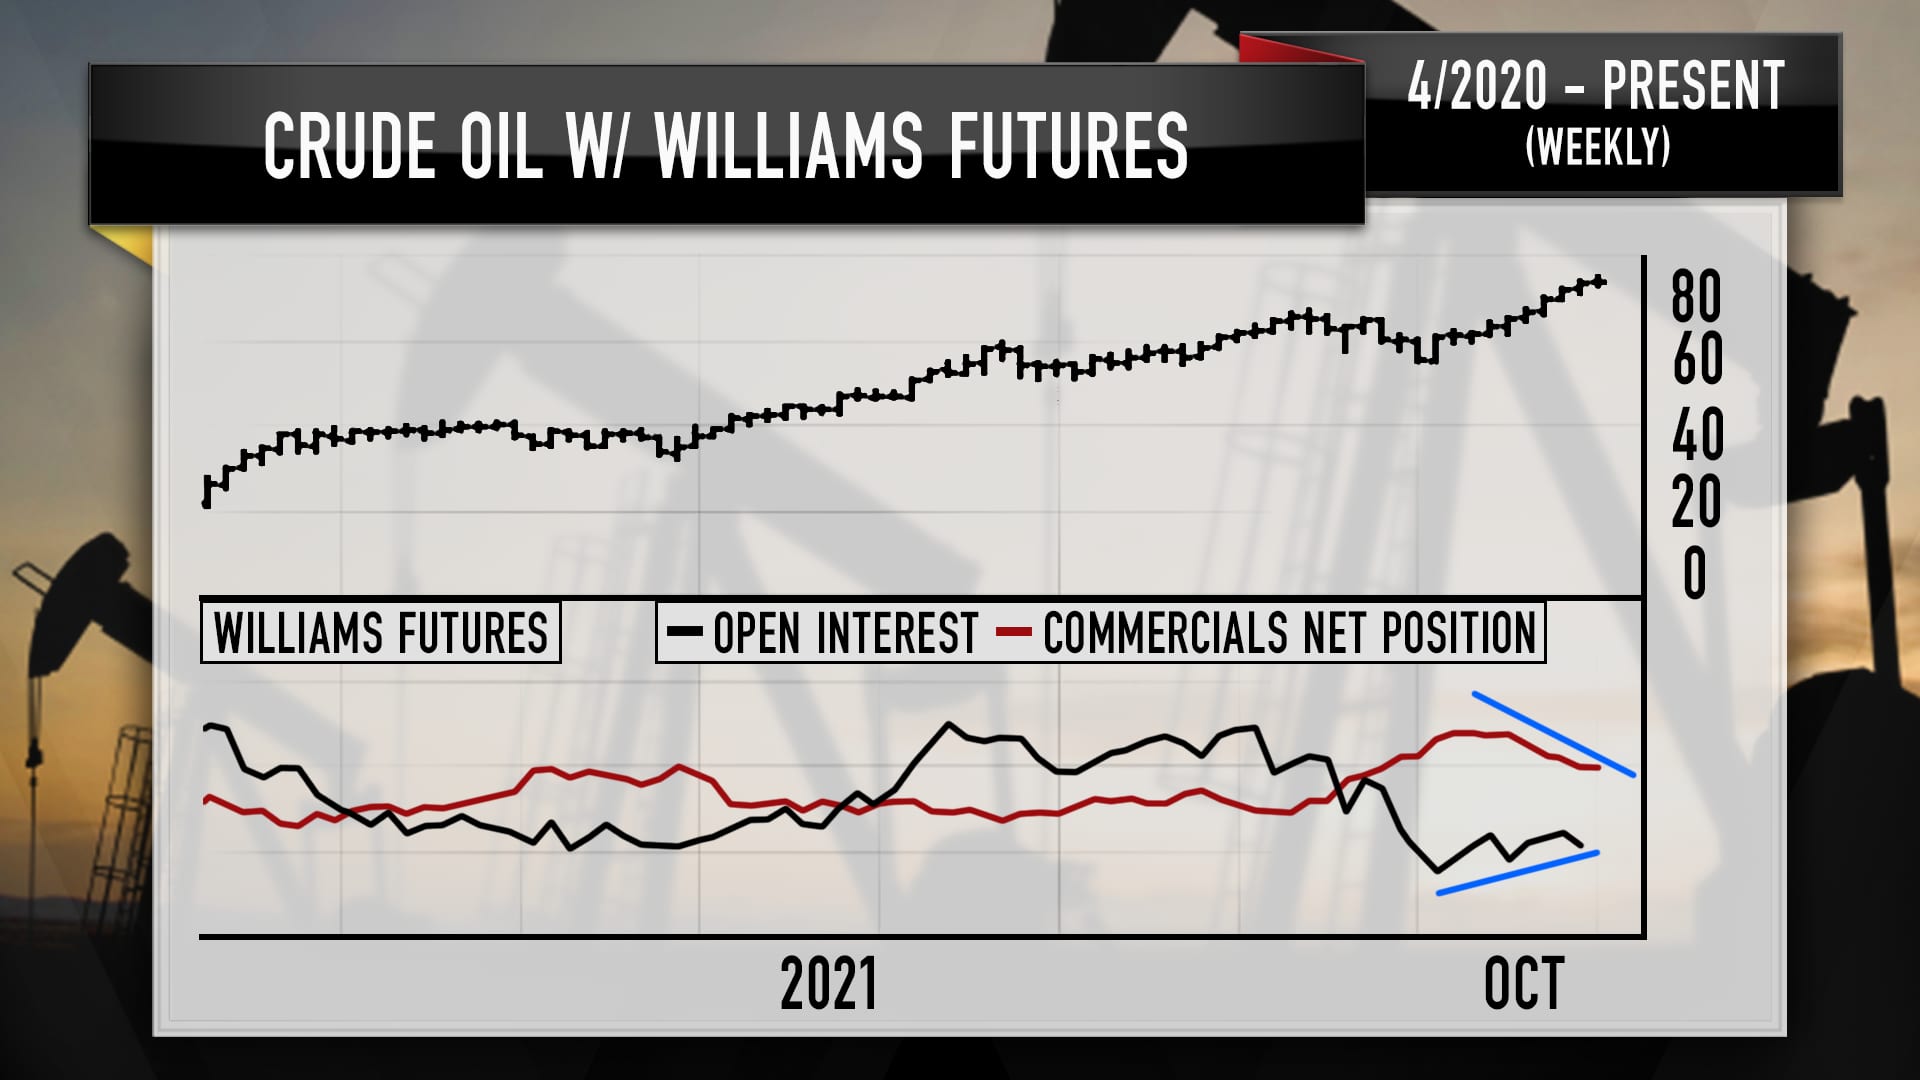 Open interest in oil futures versus net position of commercial hedgers in 2021, based on technical analysis from Larry Williams. CNBC